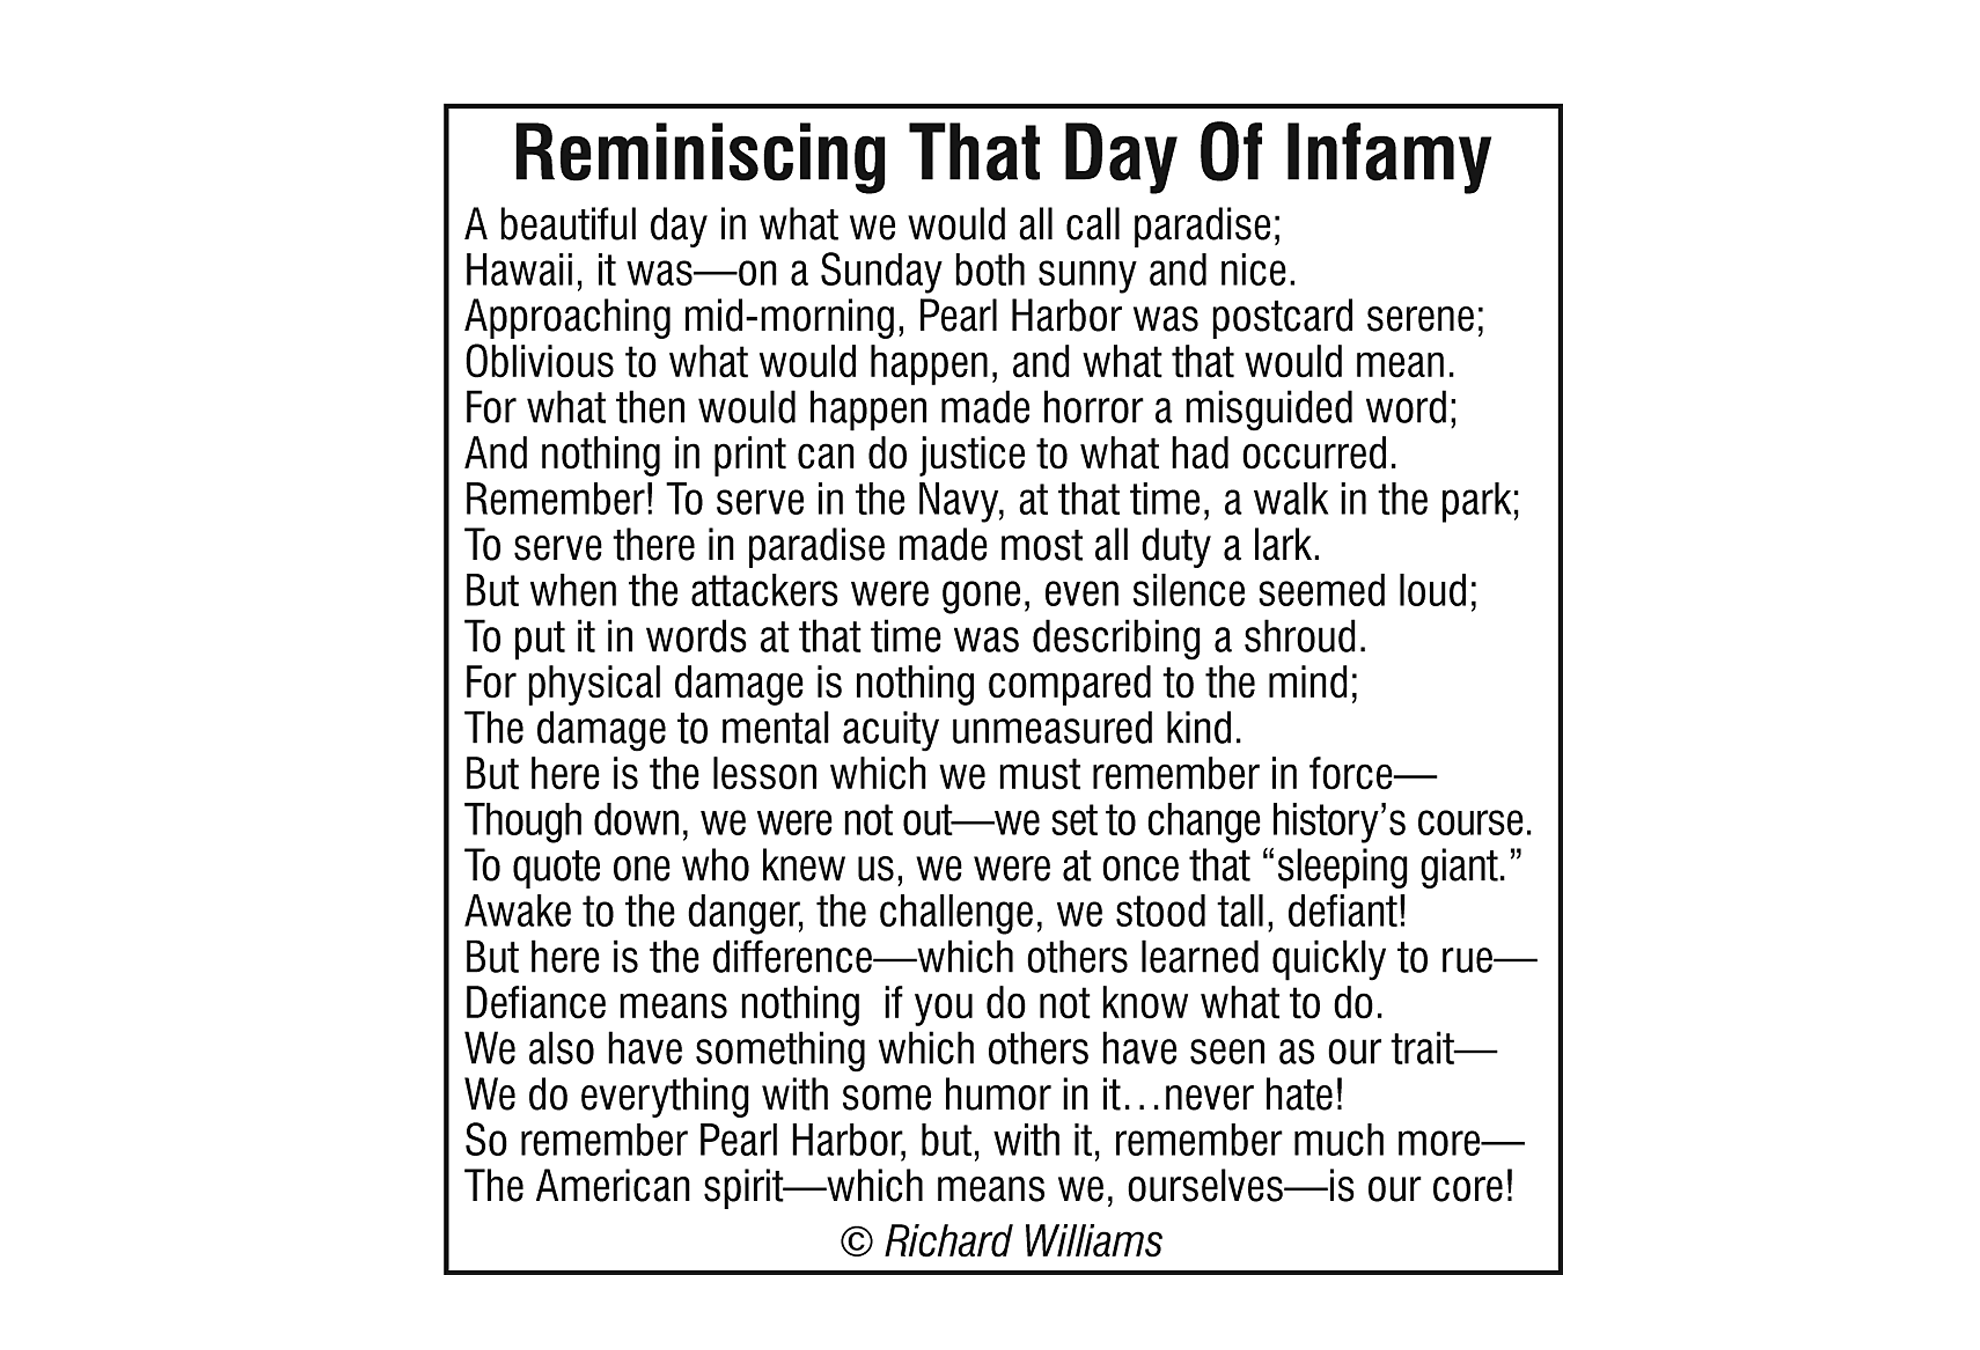 Richard Williams Poem - Reminiscing That Day of Infamy 12-6-18